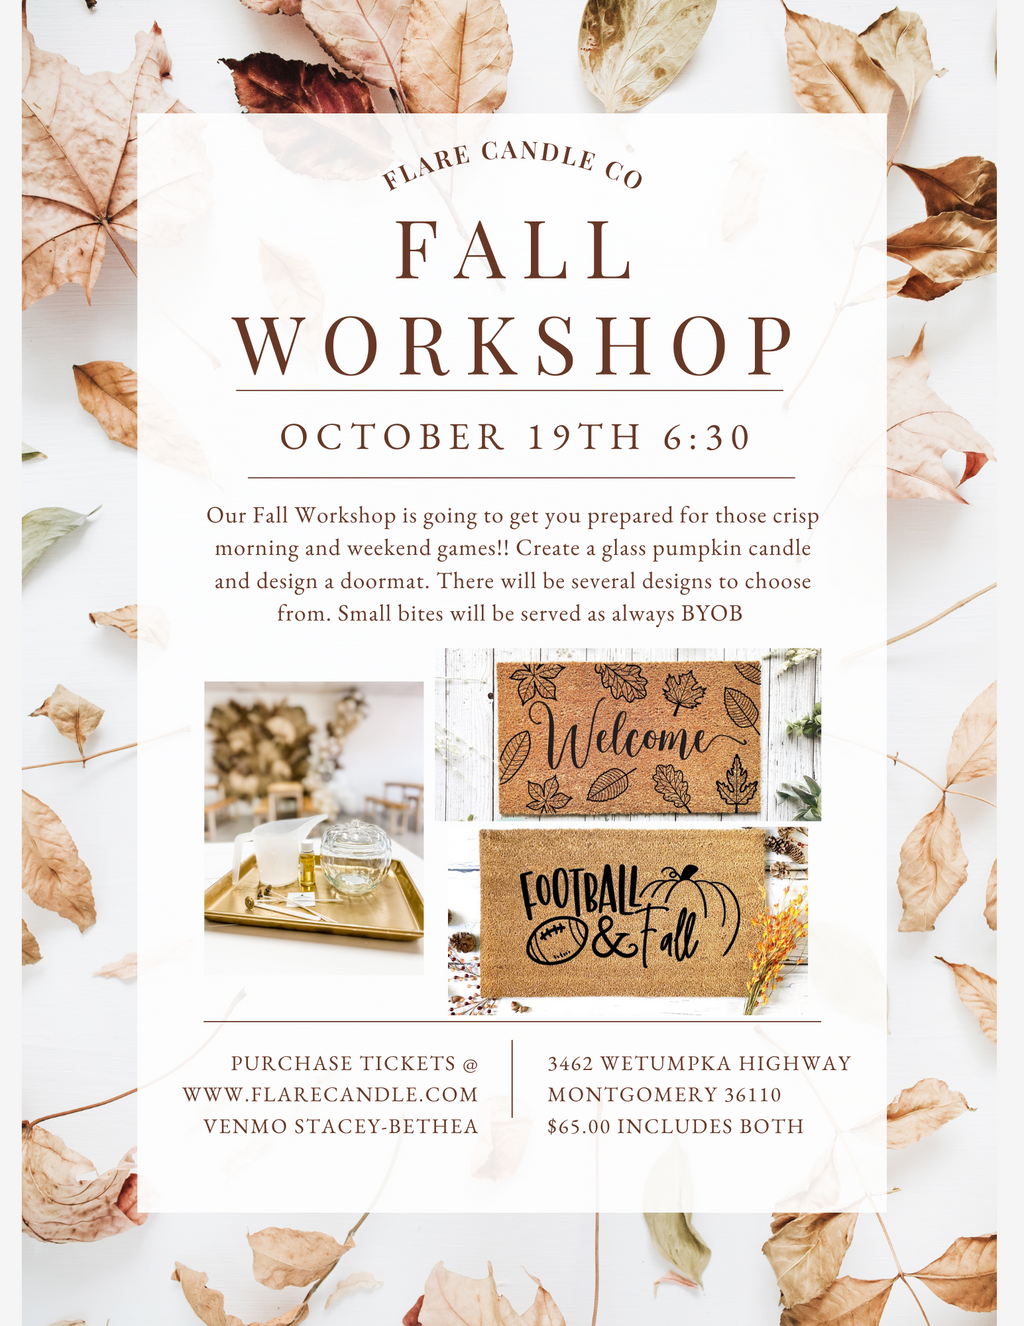 Fall Workshop October 19th